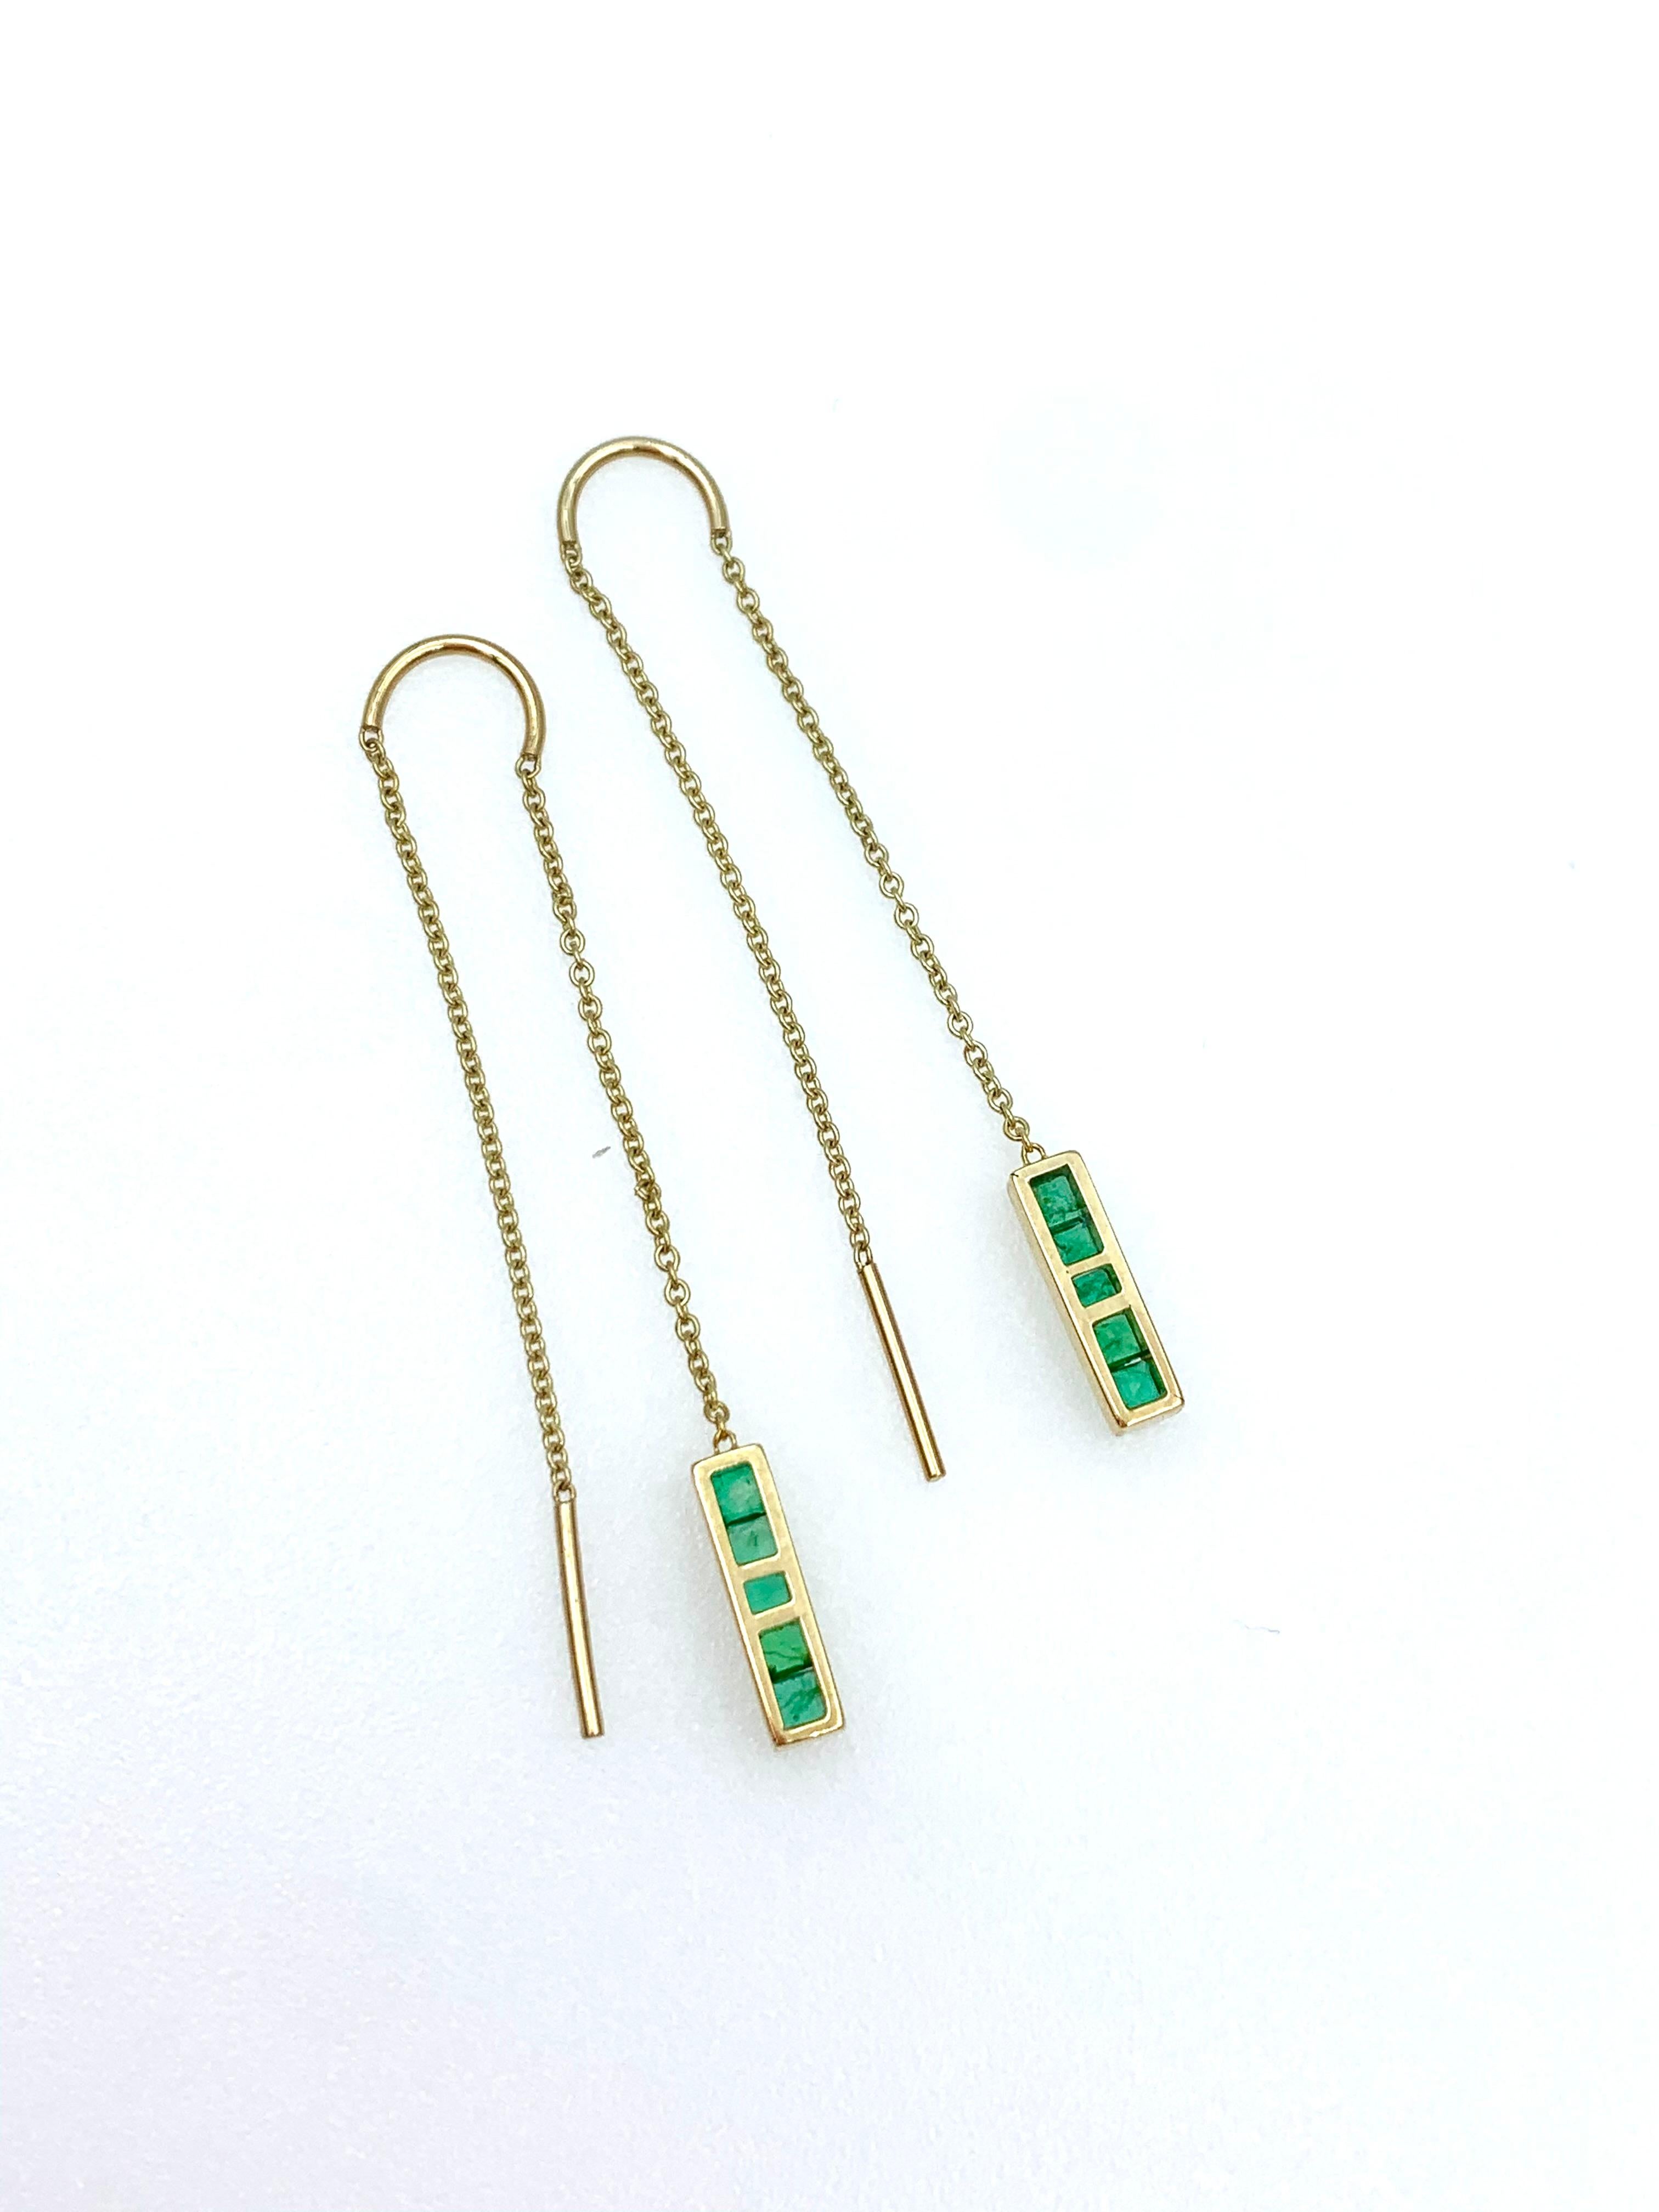 Hand made in 9 karat yellow gold and five channel set Emeralds on each Earring, these light weight thread through earrings are ideal for a day to night transition, they look just as chic in casual attire as they do in a more elegant setting. Part of